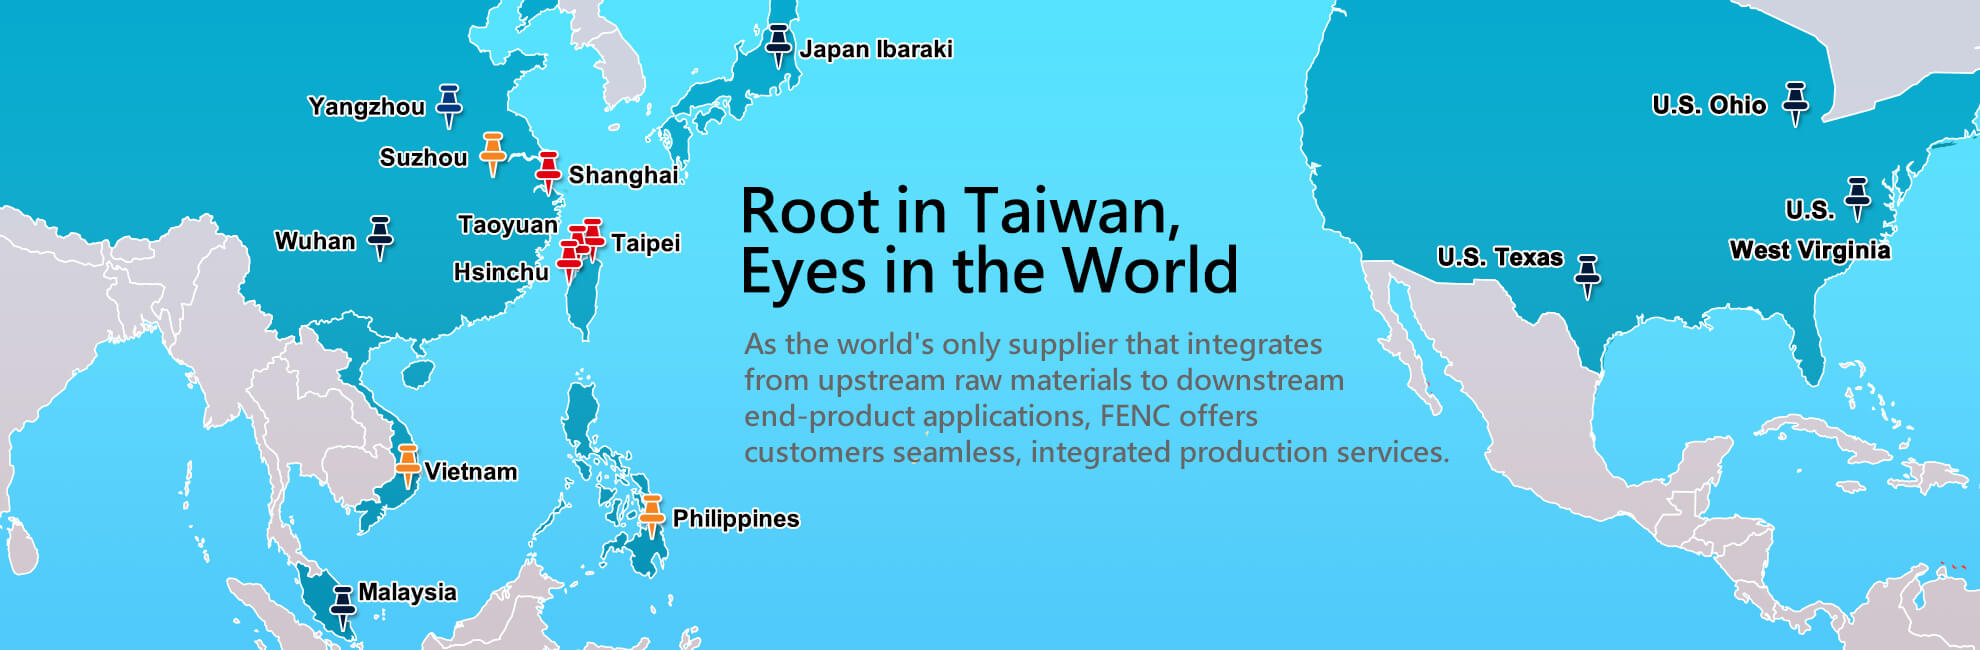 Root in Taiwan, Eyes in the World